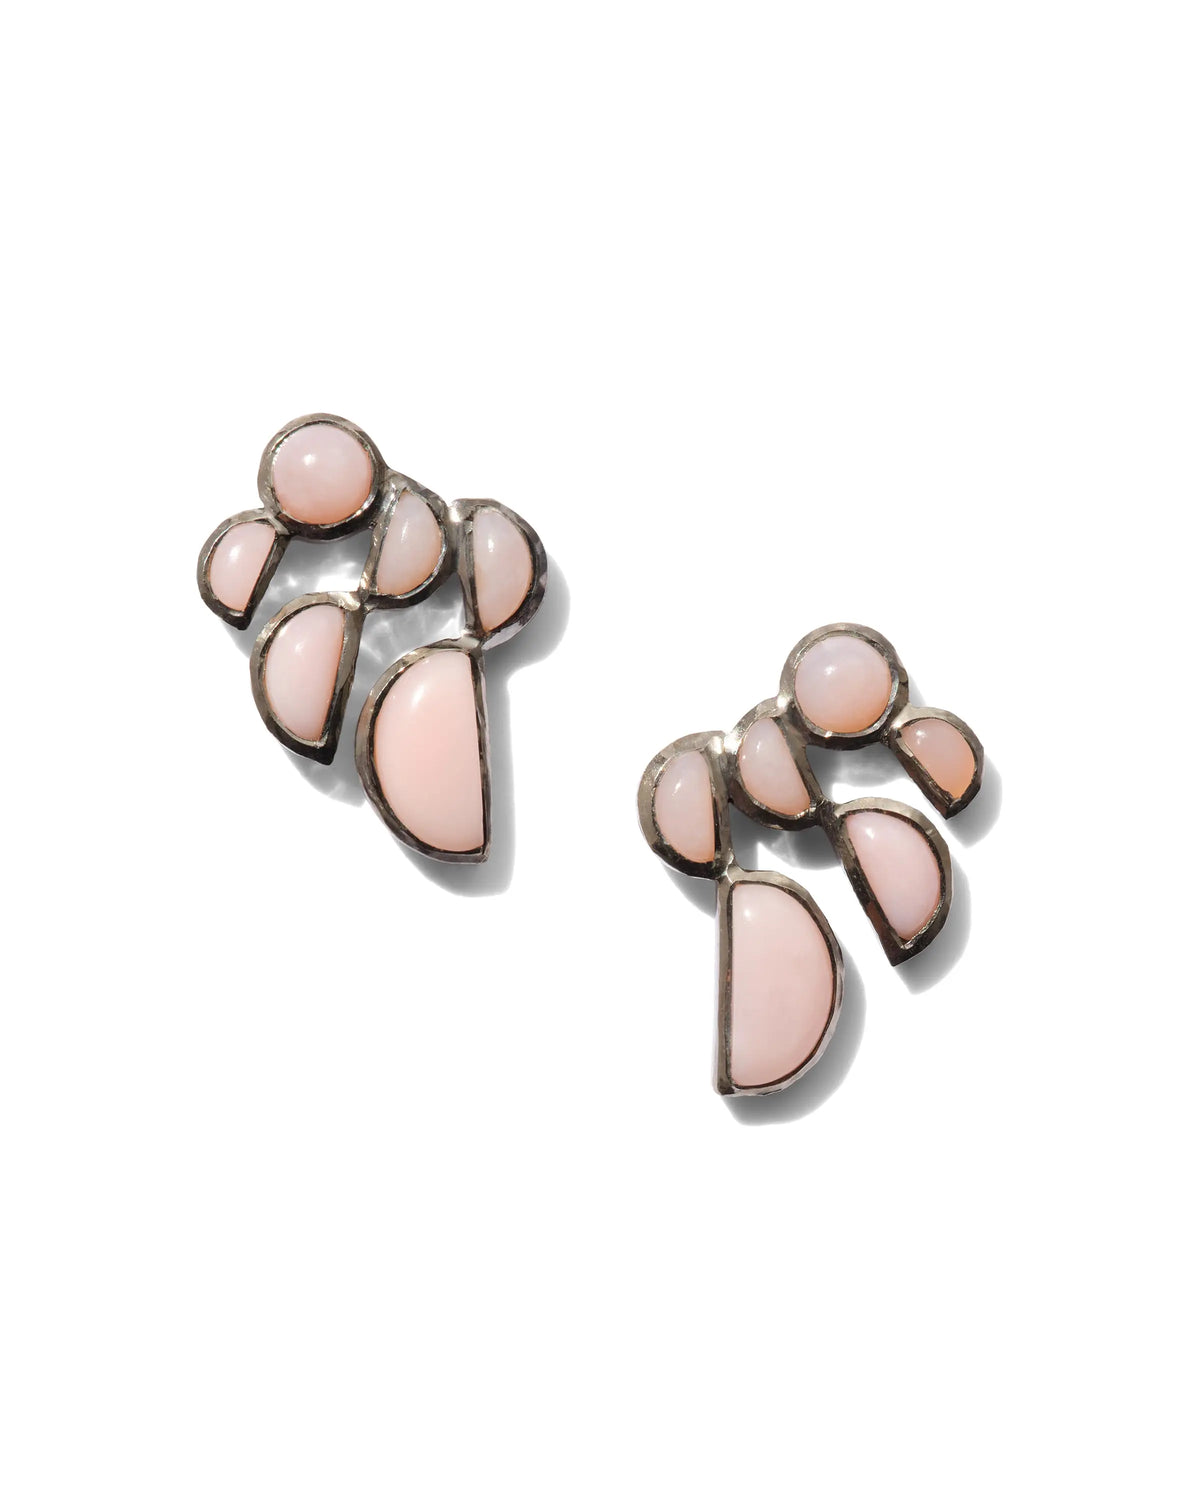 Designed by Nak Armstrong these earrings are so much fun. They are set in sterling silver with a black rhodium finish and pink opal. They measure 3/4&quot; in diameter and are post and nut closure.